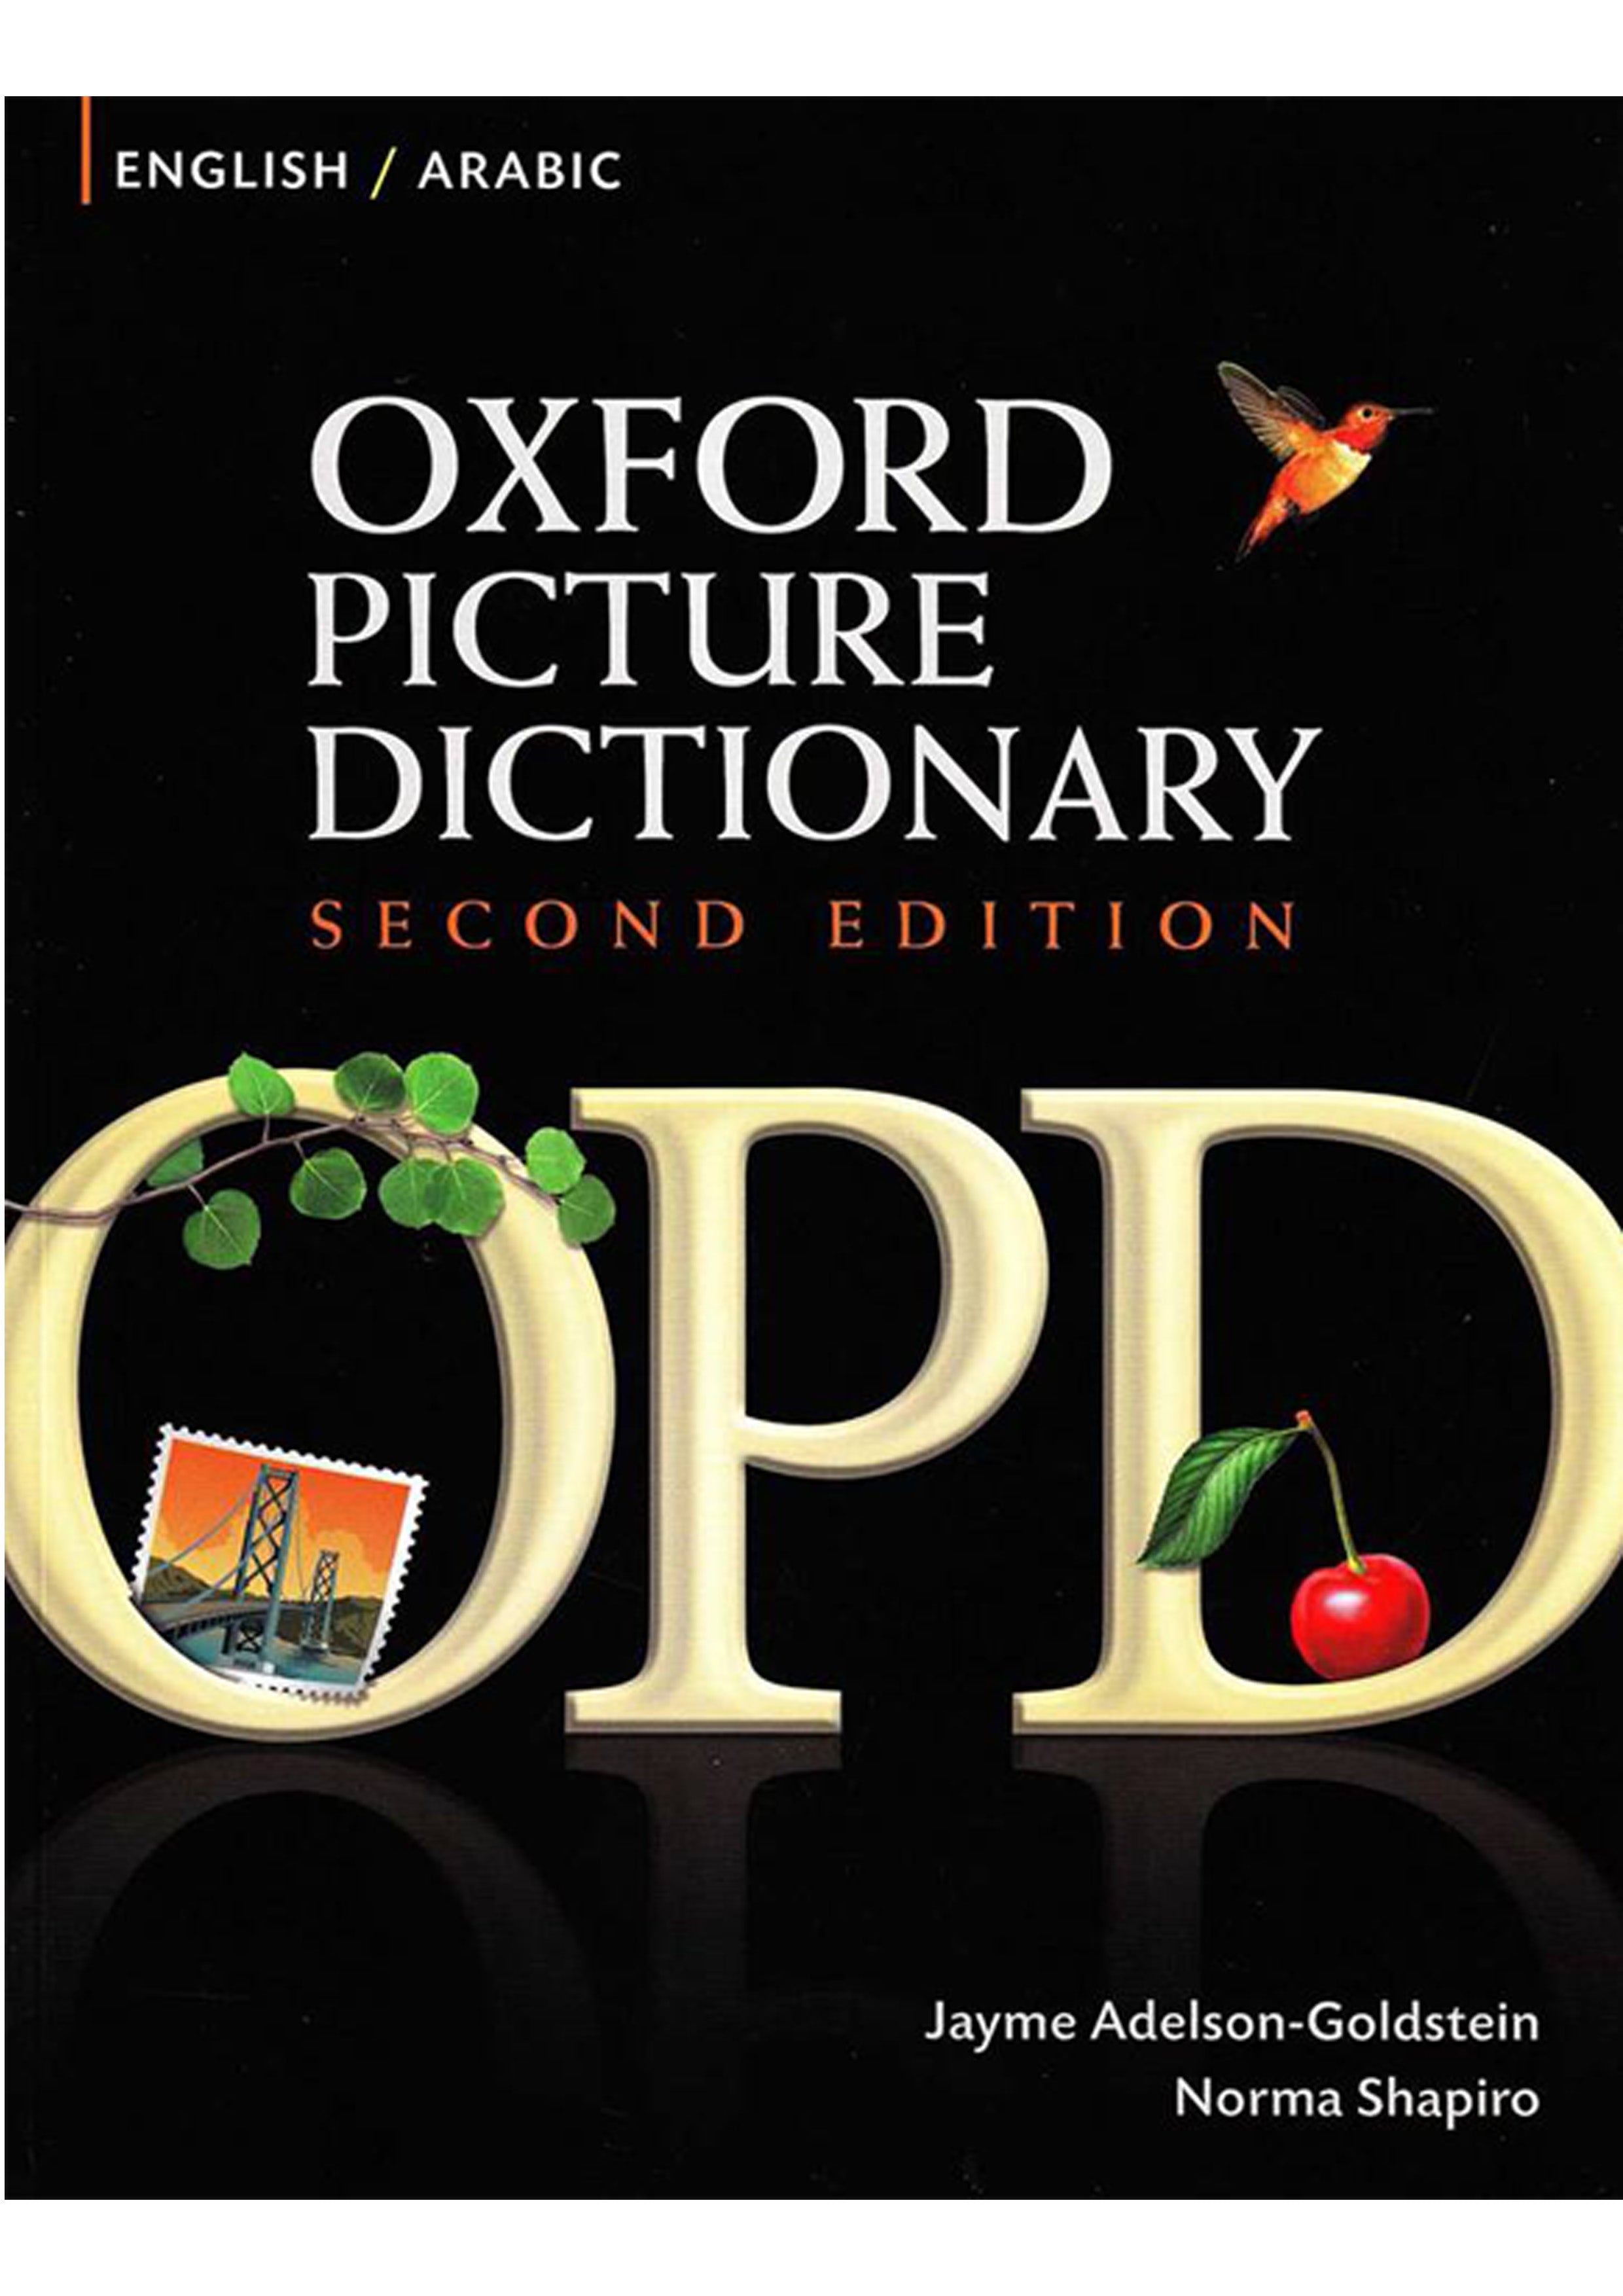 Oxford Picture Dictionary Second Edition: English-Arabic